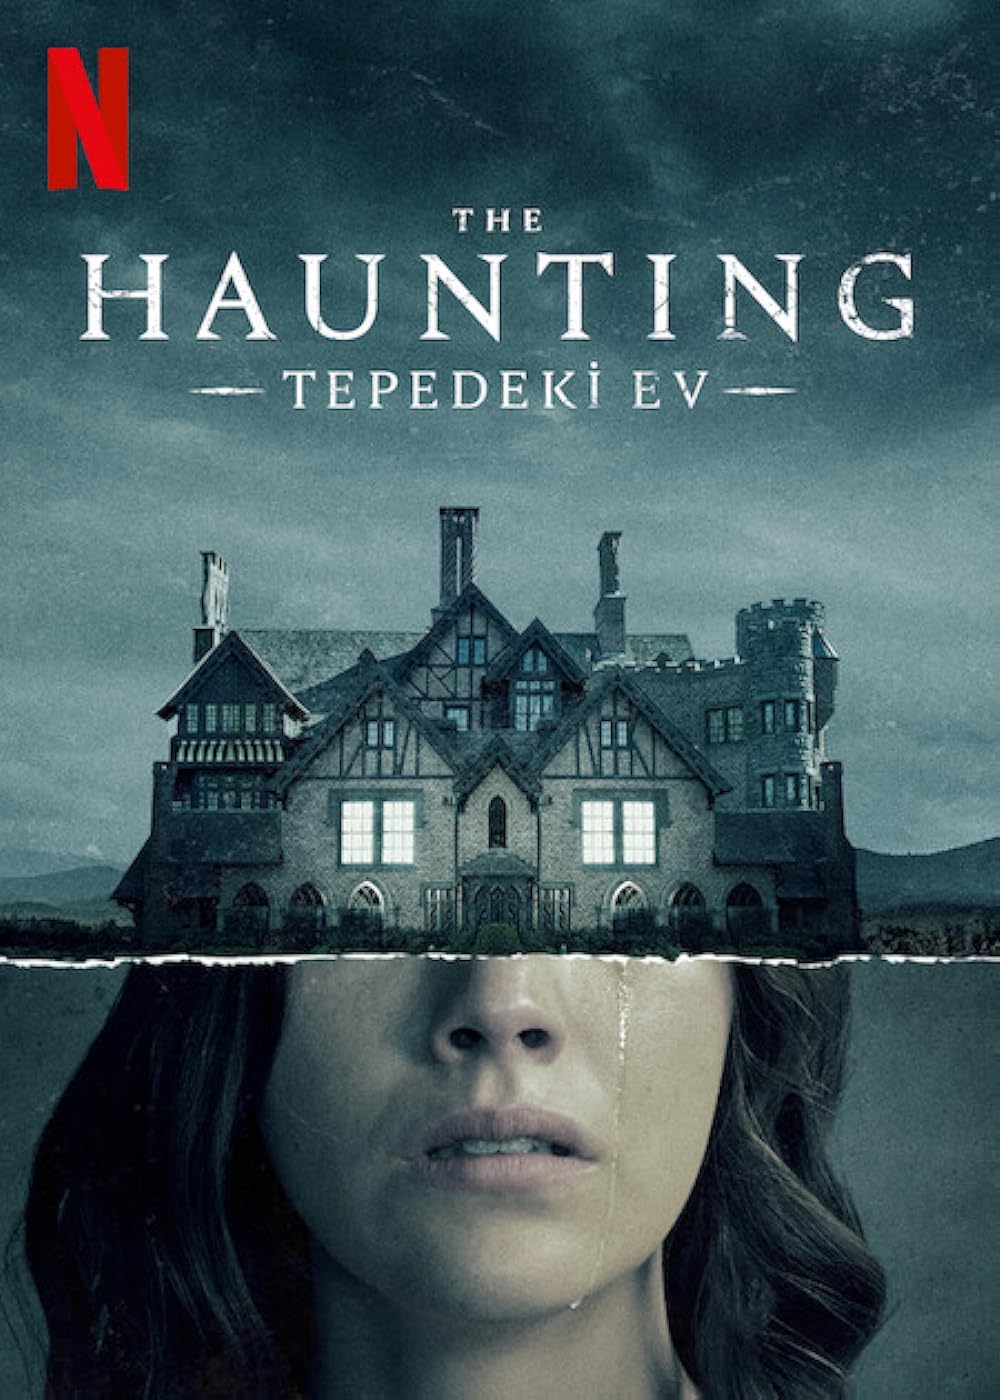 The Haunting of Hill House (2018) S1 640Kbps 23.976Fps 48Khz 5.1Ch DD+ NF E-AC3 Turkish Audio TAC